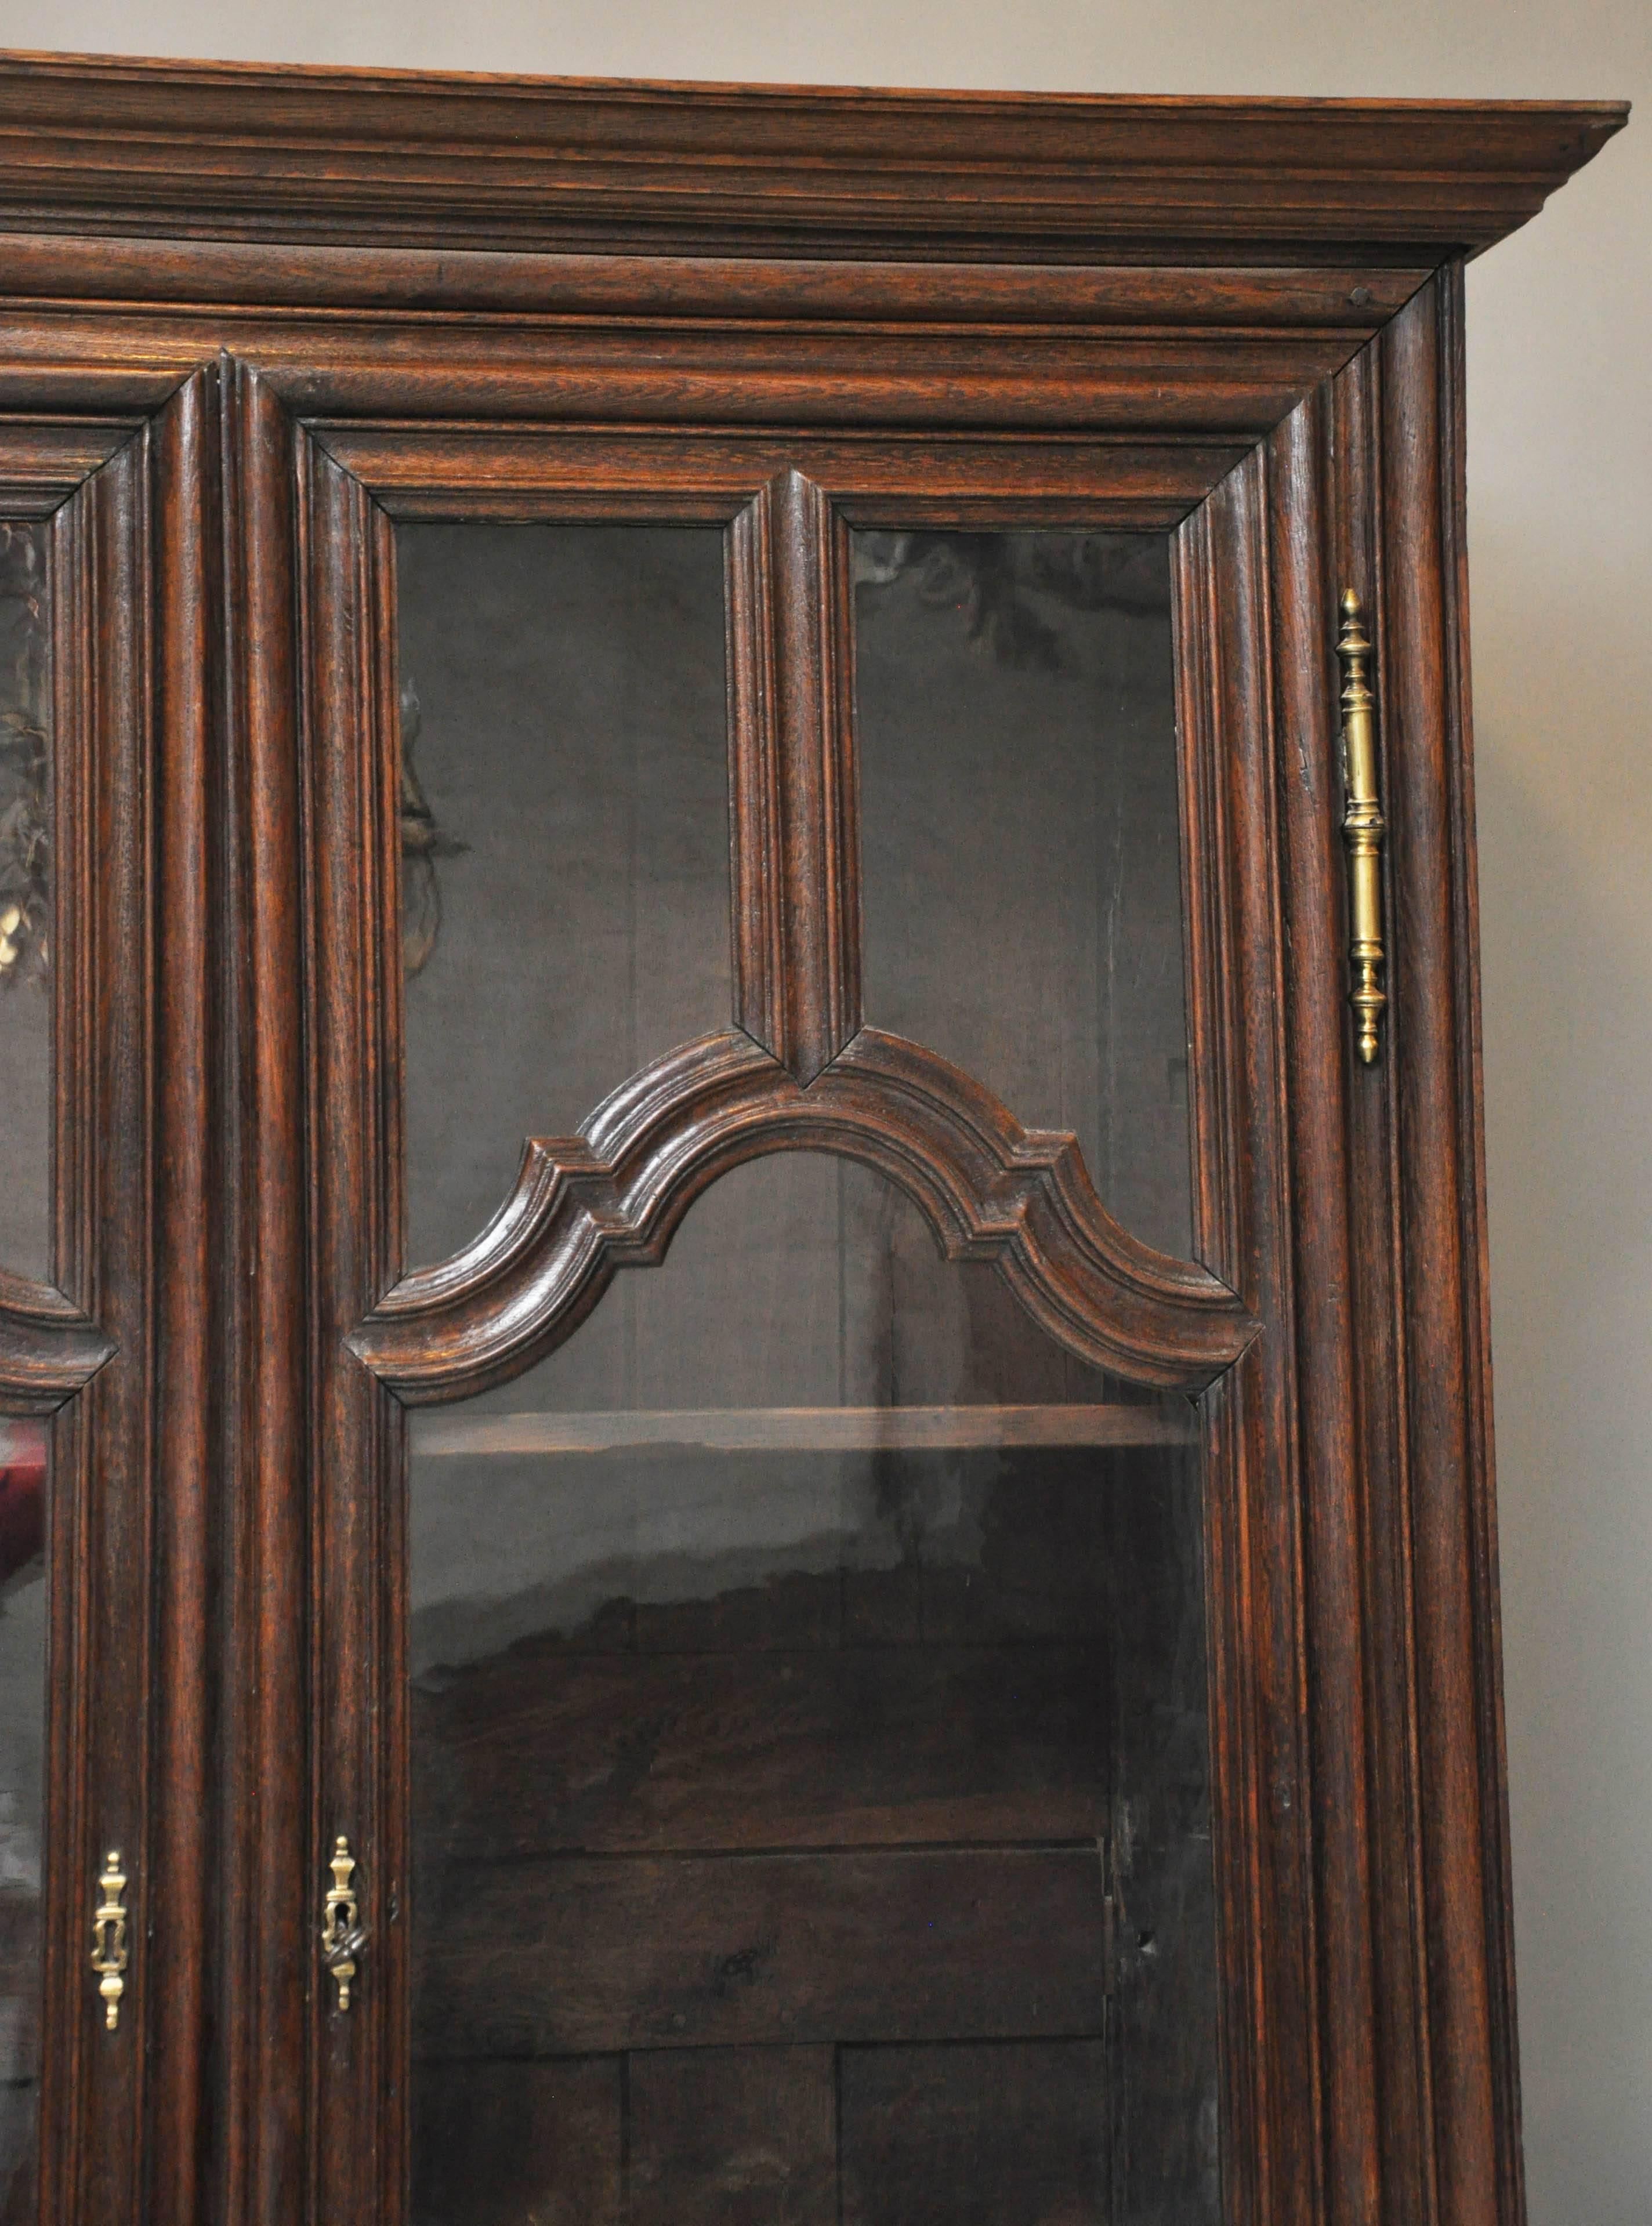 French Louis XIV oak armoire, bookcase or curio from the Northern Burgundy Region. This Central Eastern France region near the border of Switzerland is world renowned for its wine and food. Prominent flat molded cornice above a pair of doors each